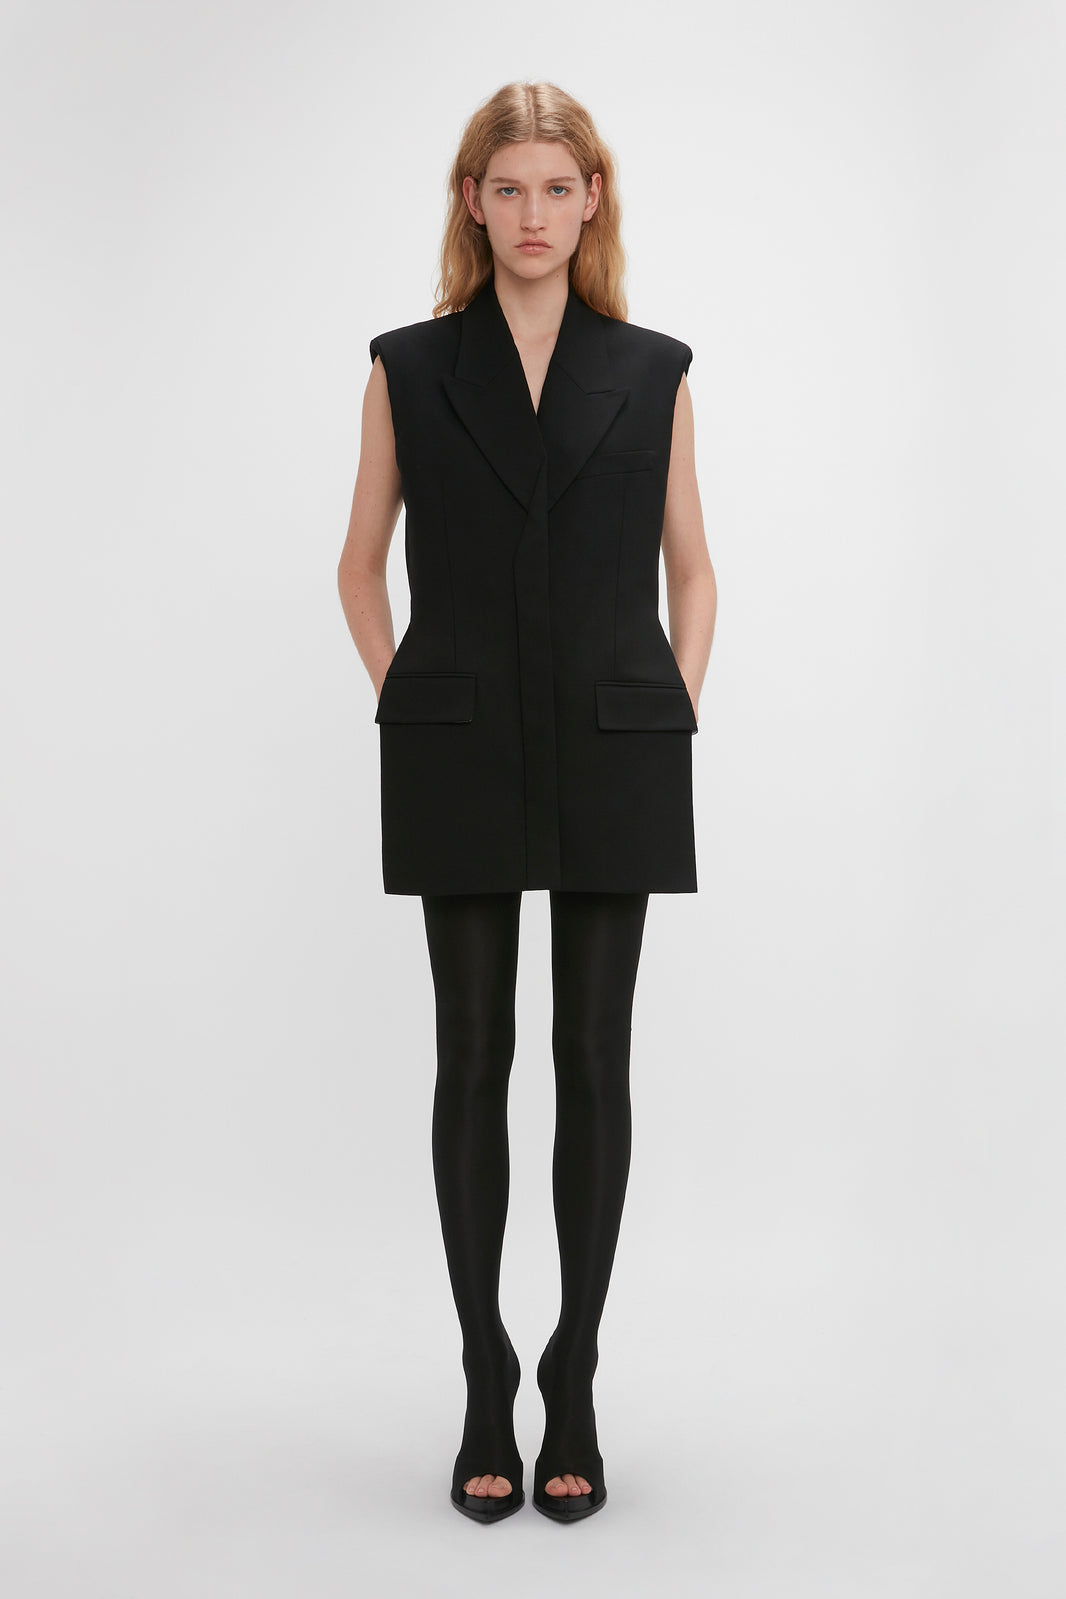 Just in | Shop Designer Clothing & the New Collection – Victoria Beckham